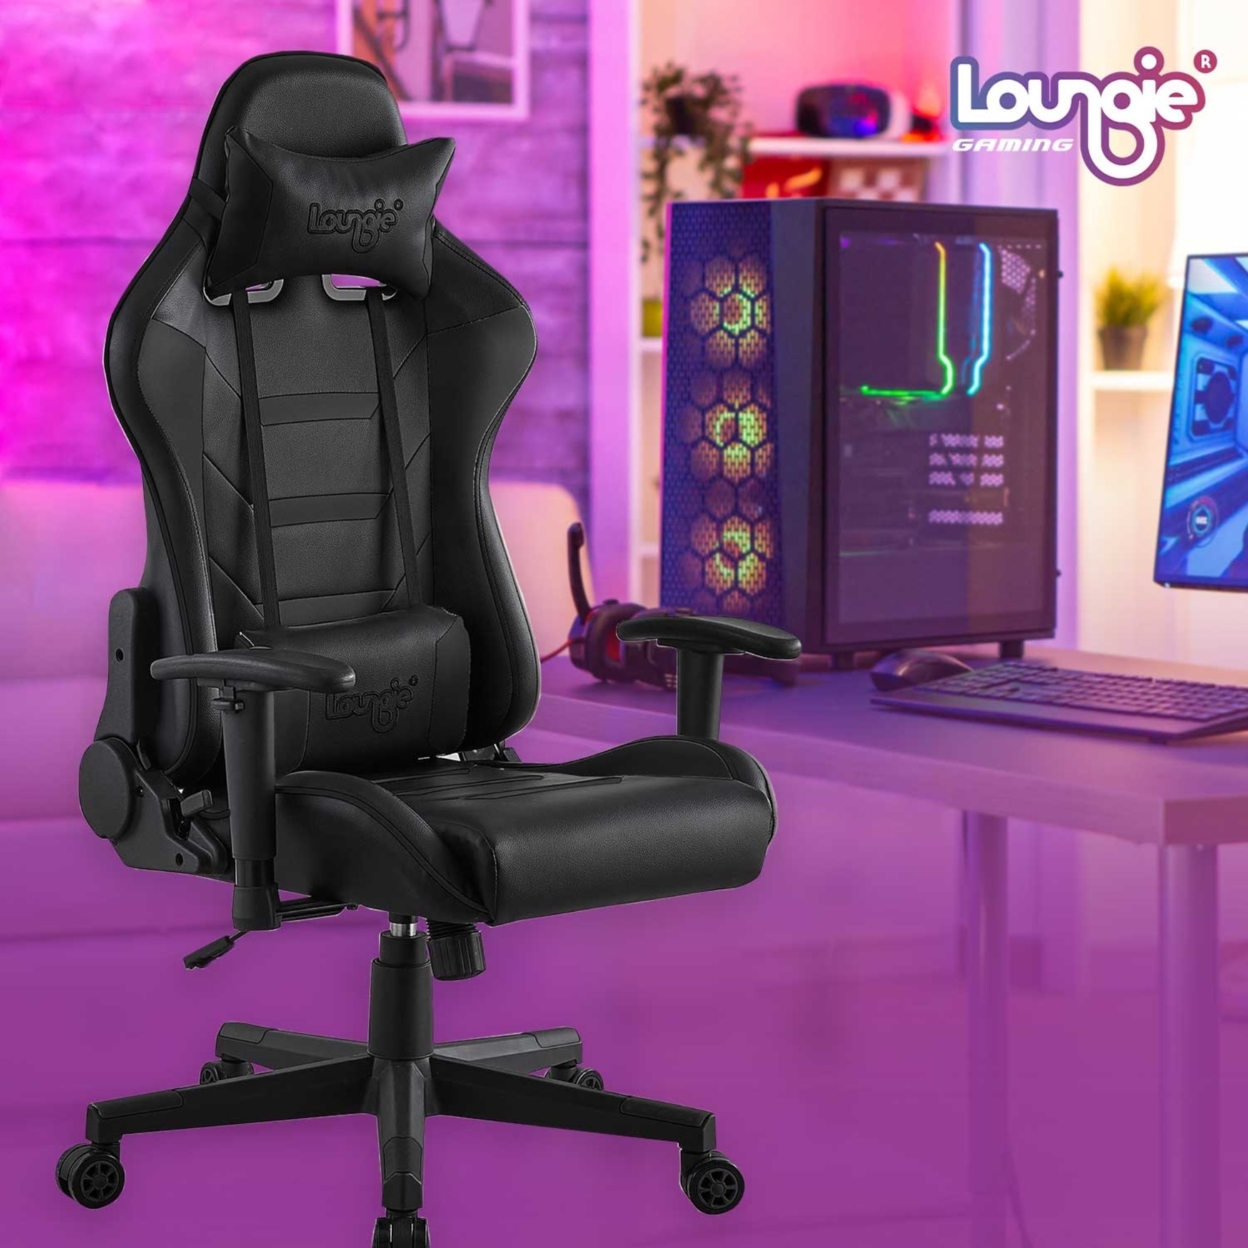 Brad Game Chair-Swivel, Adjustable Back Angle, Seat Height and Armrest-360 Degree Rotation-Neck Support, Lumbar Support Cushion - black